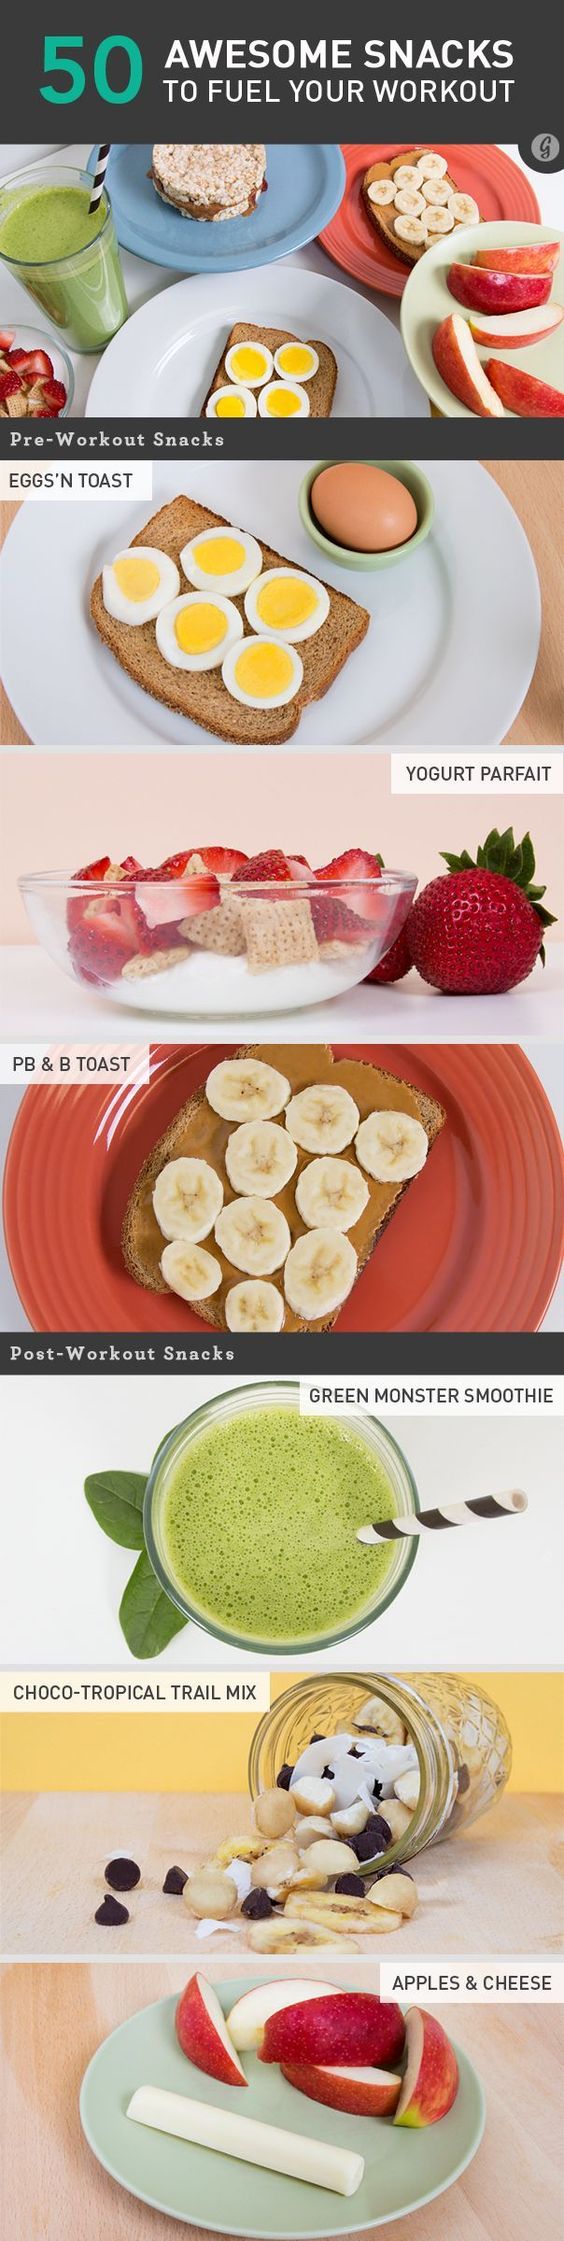 50 Snacks to Eat Before or After Your Workout